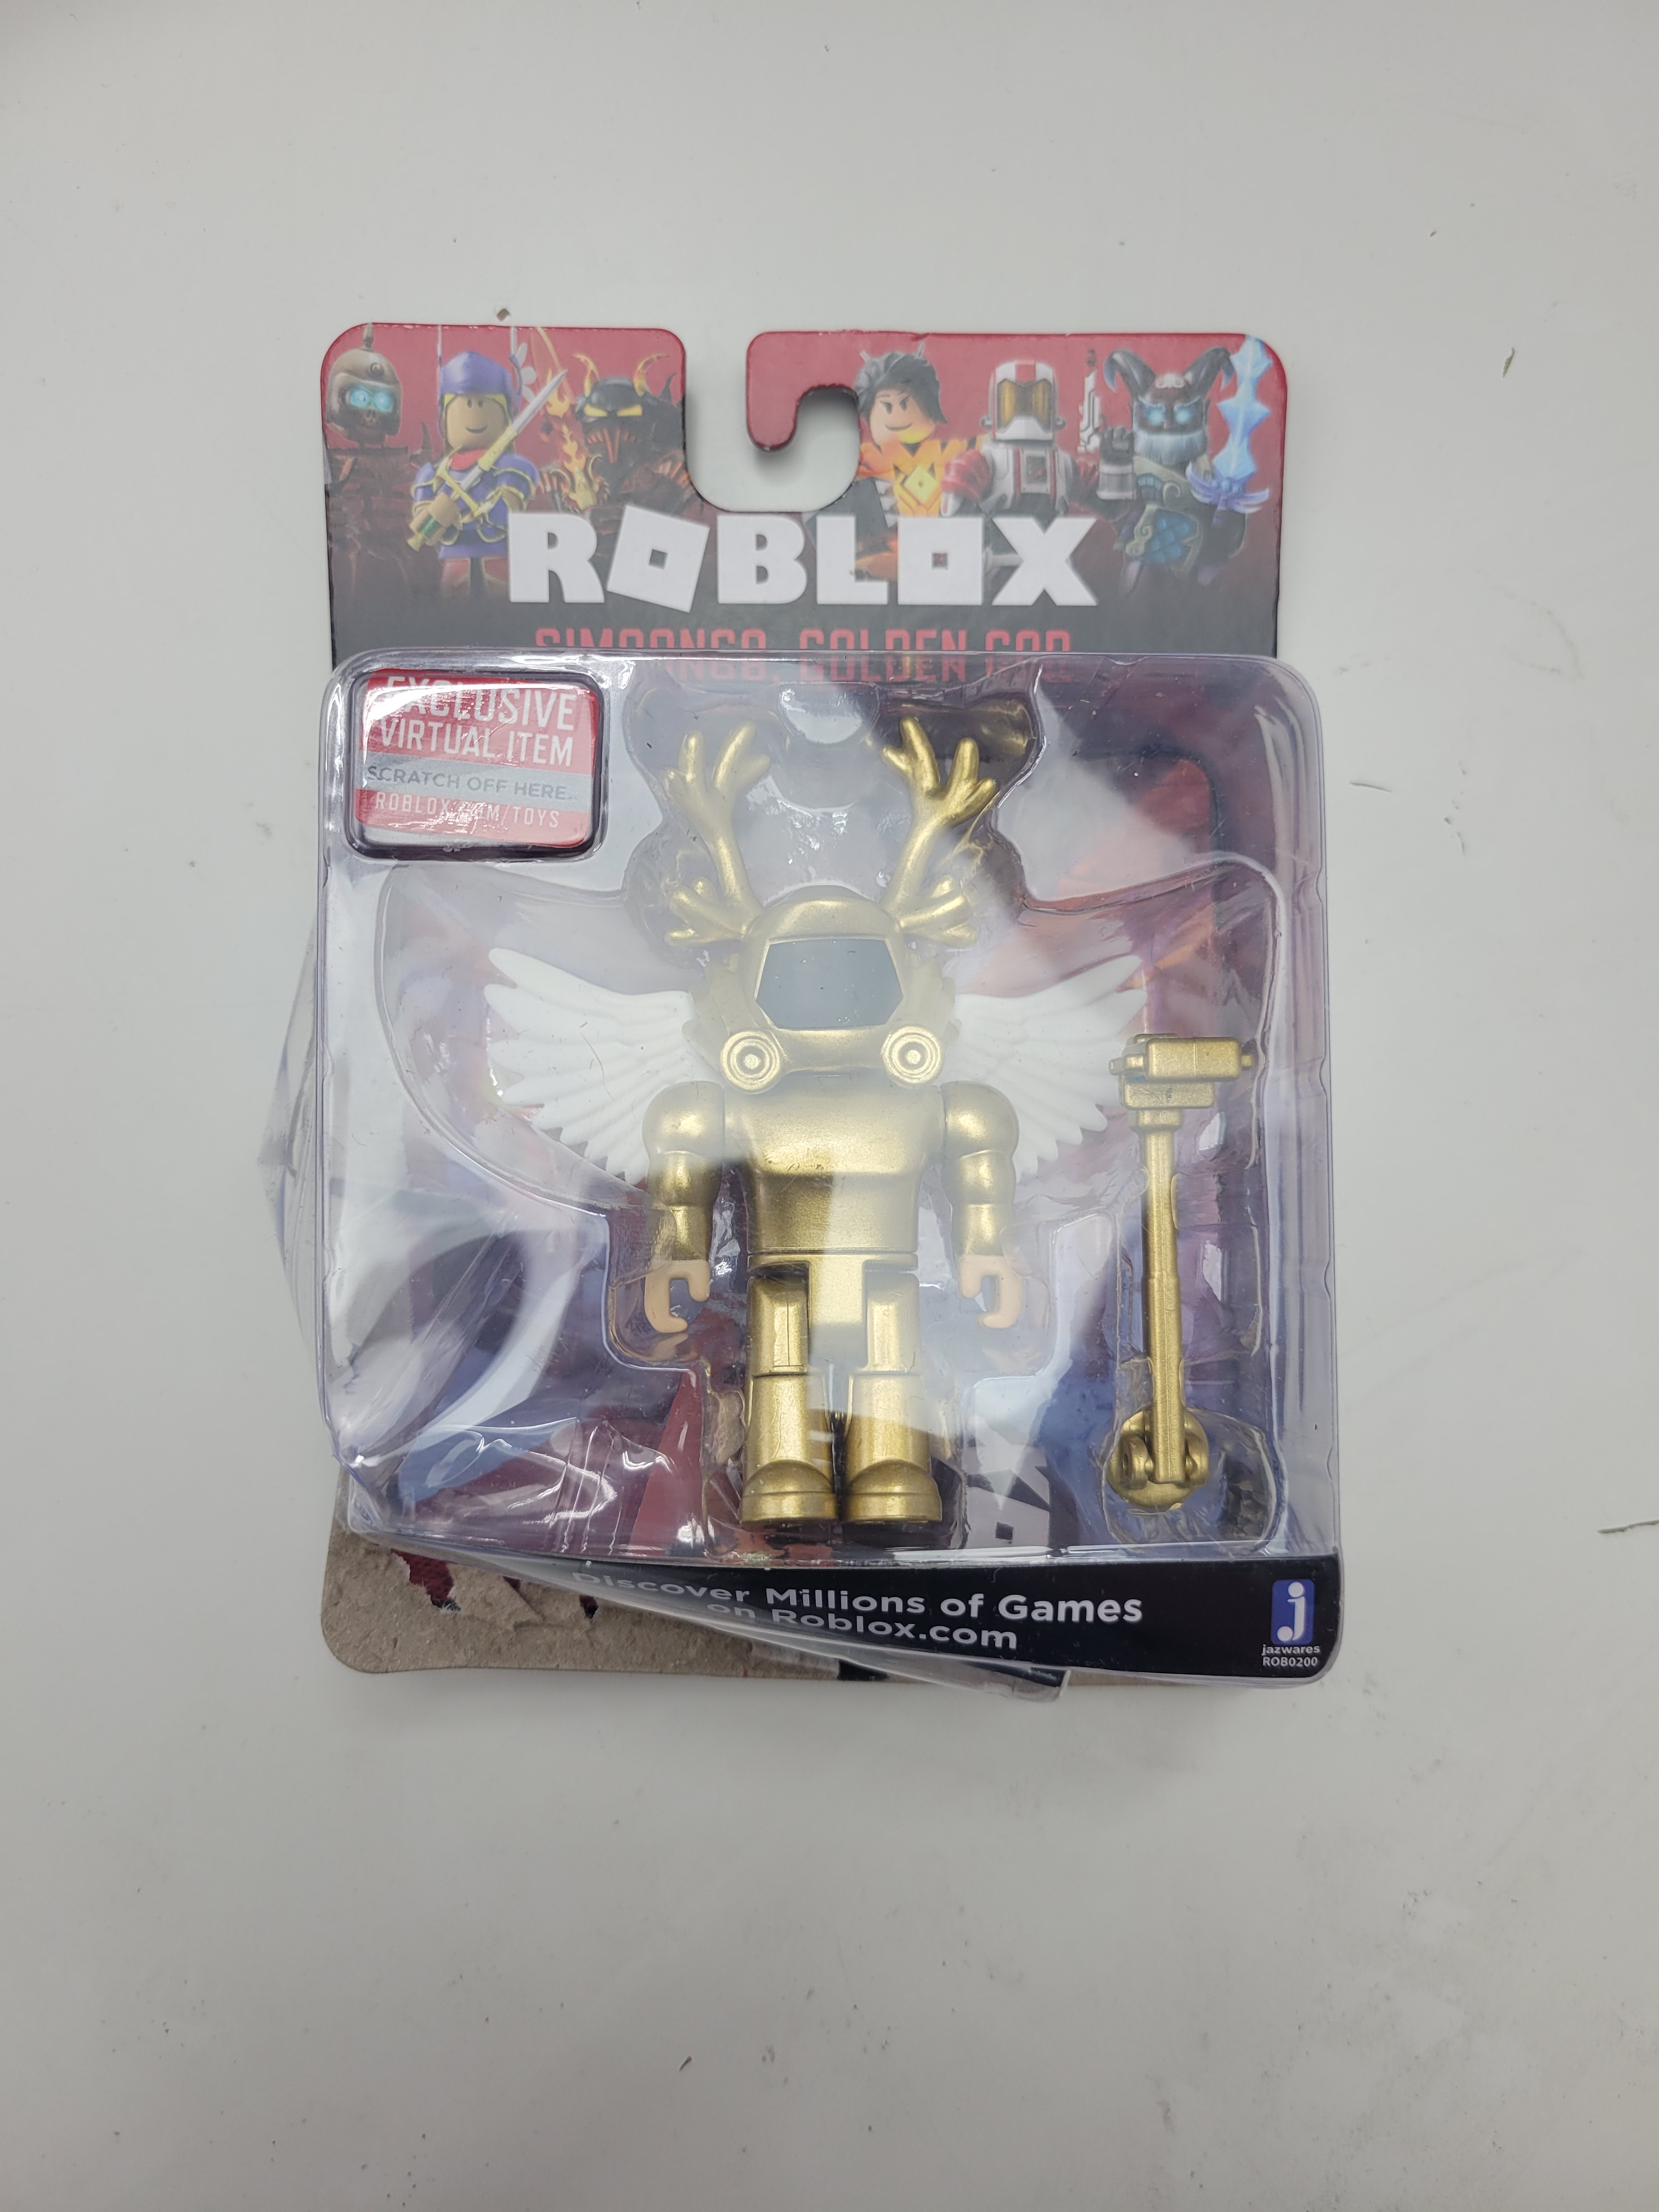  Roblox Simoon68: Golden God 3.5 Inch Figure with